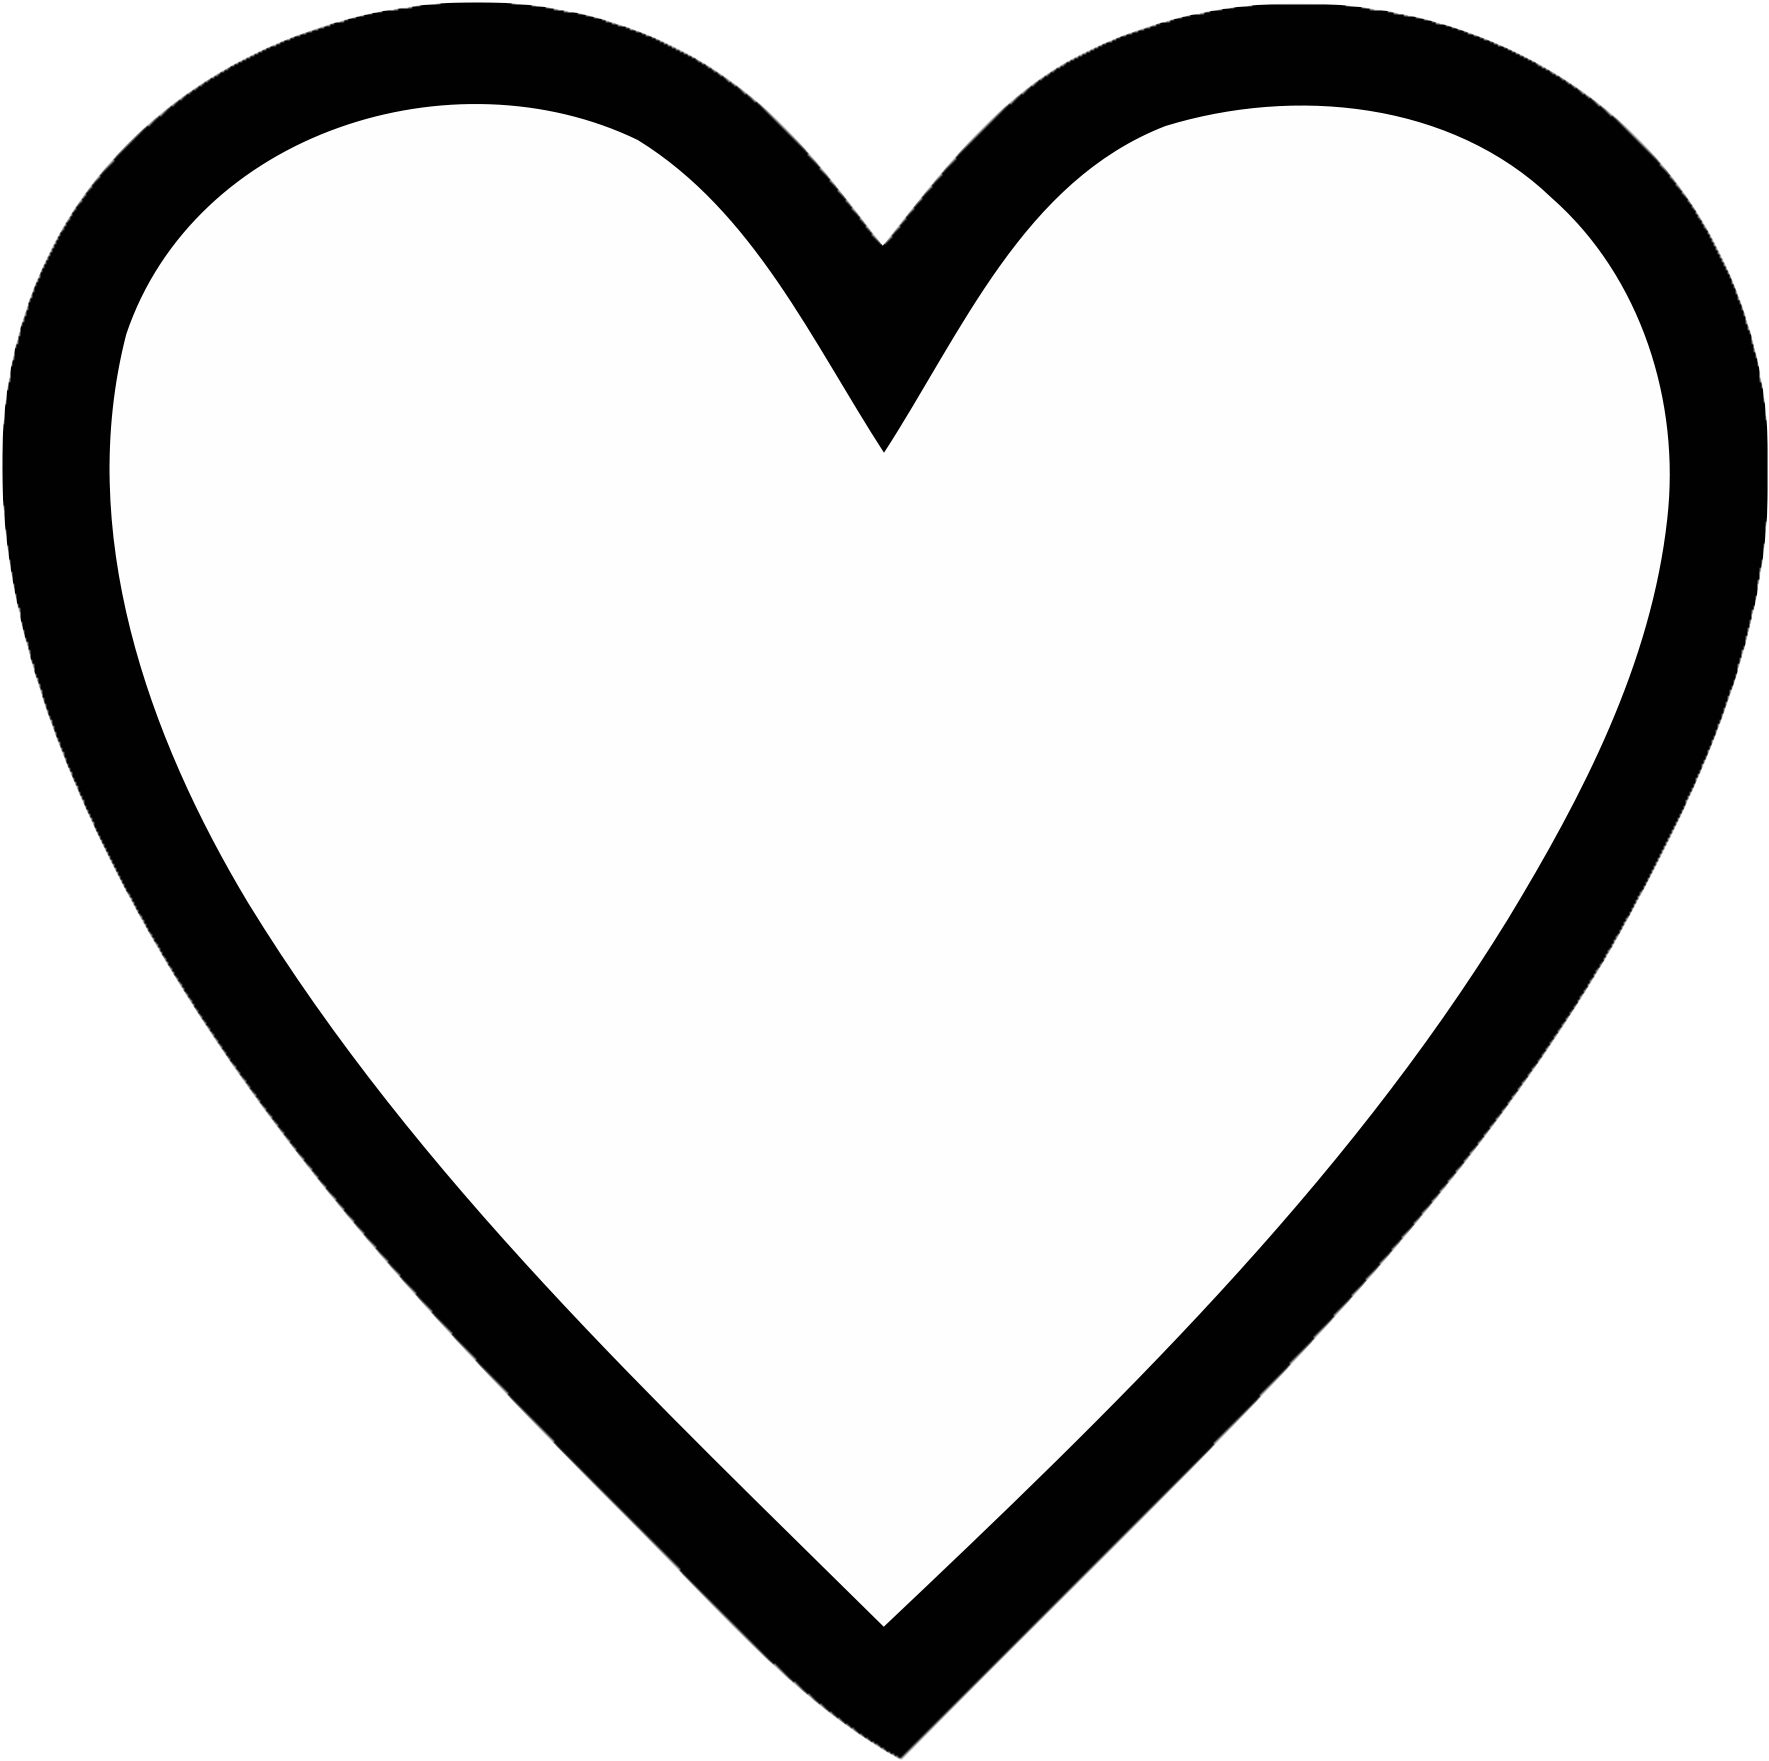 Special Heart Hd Pictures - Black Love Heart Outline.